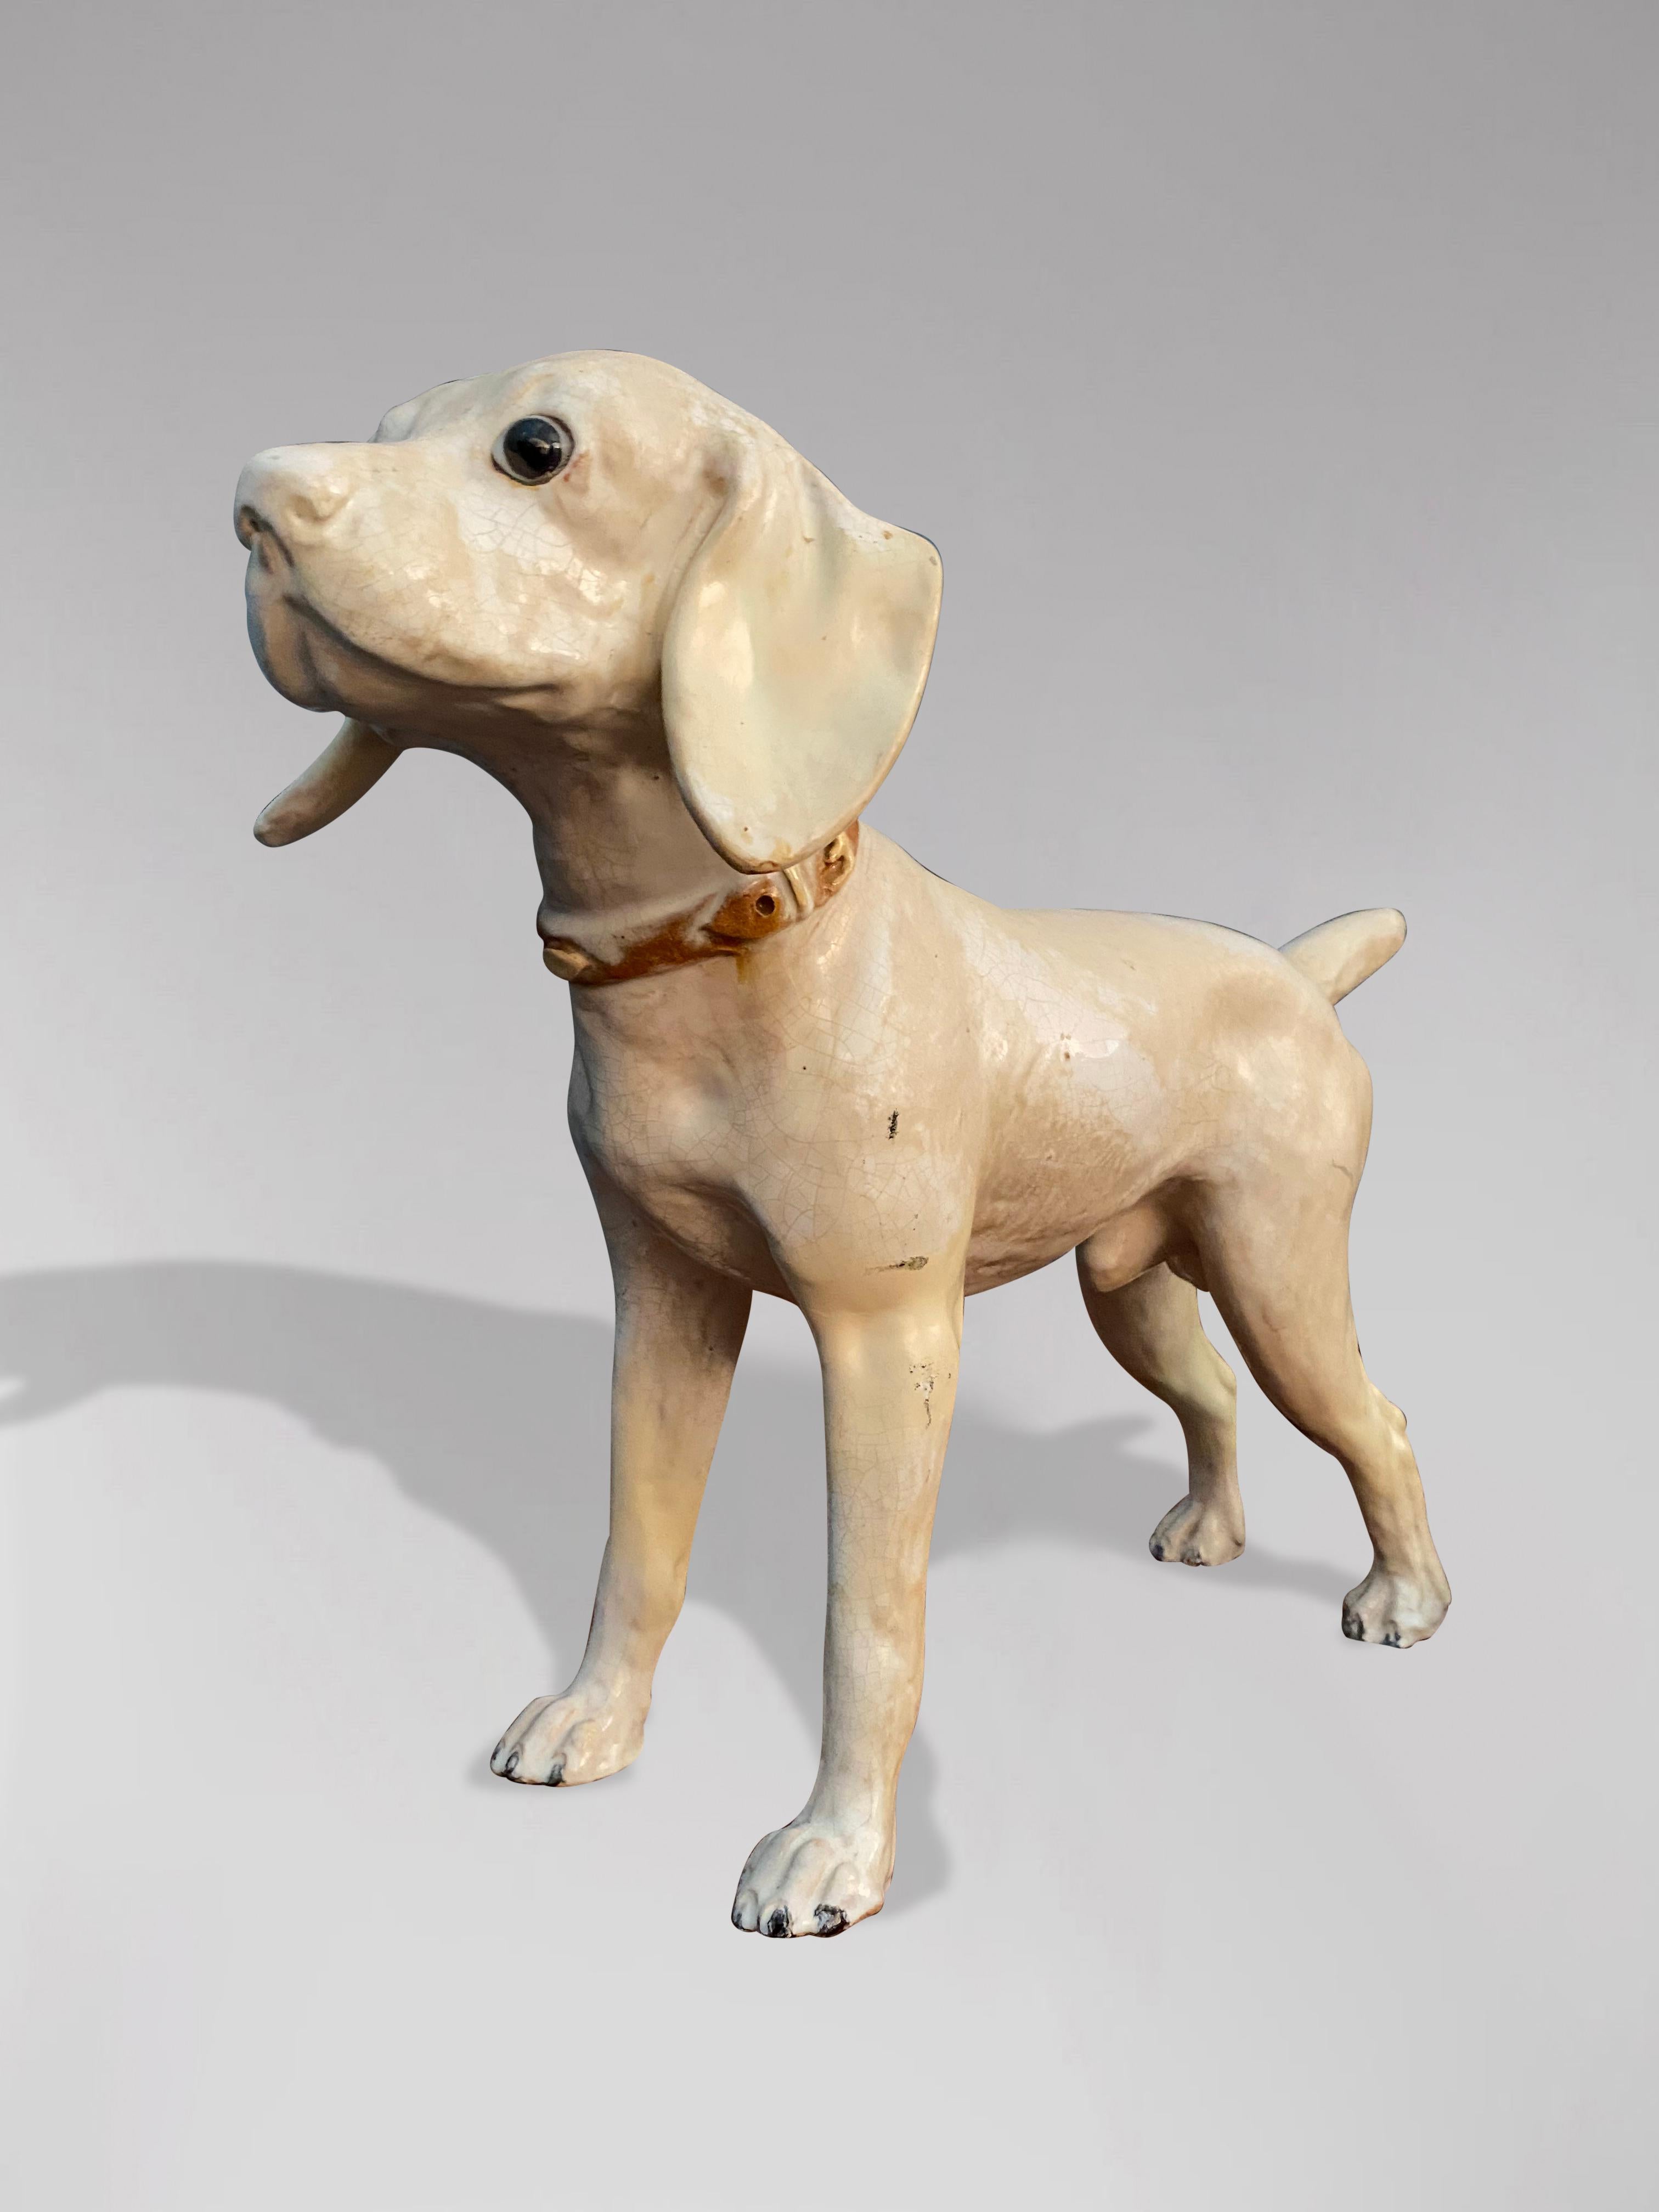 Hand-Crafted 19th Century French Earthenware Dog Sculpture from Bavent in Normandy